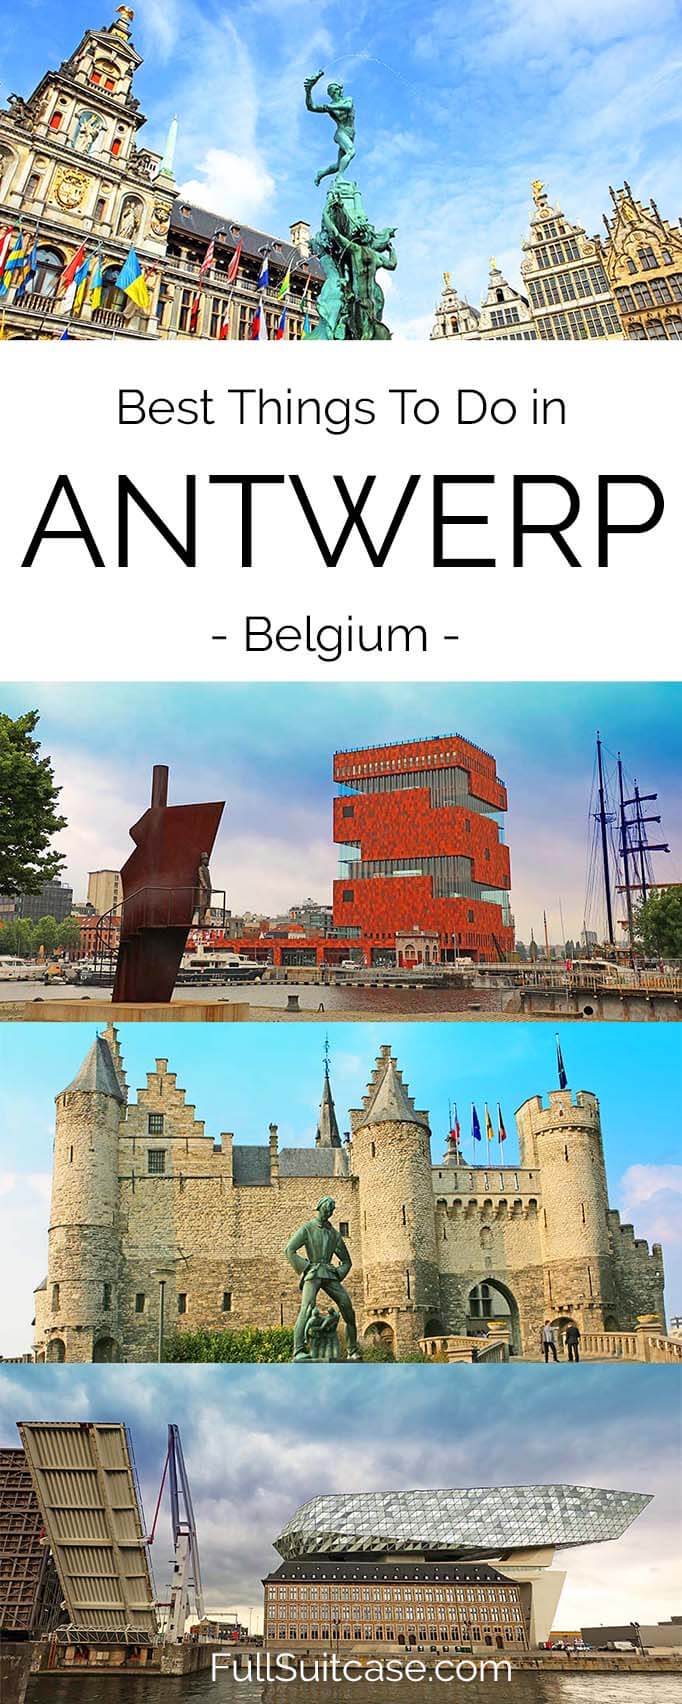 Insider's guide to the best things to see and do in Antwerp Belgium